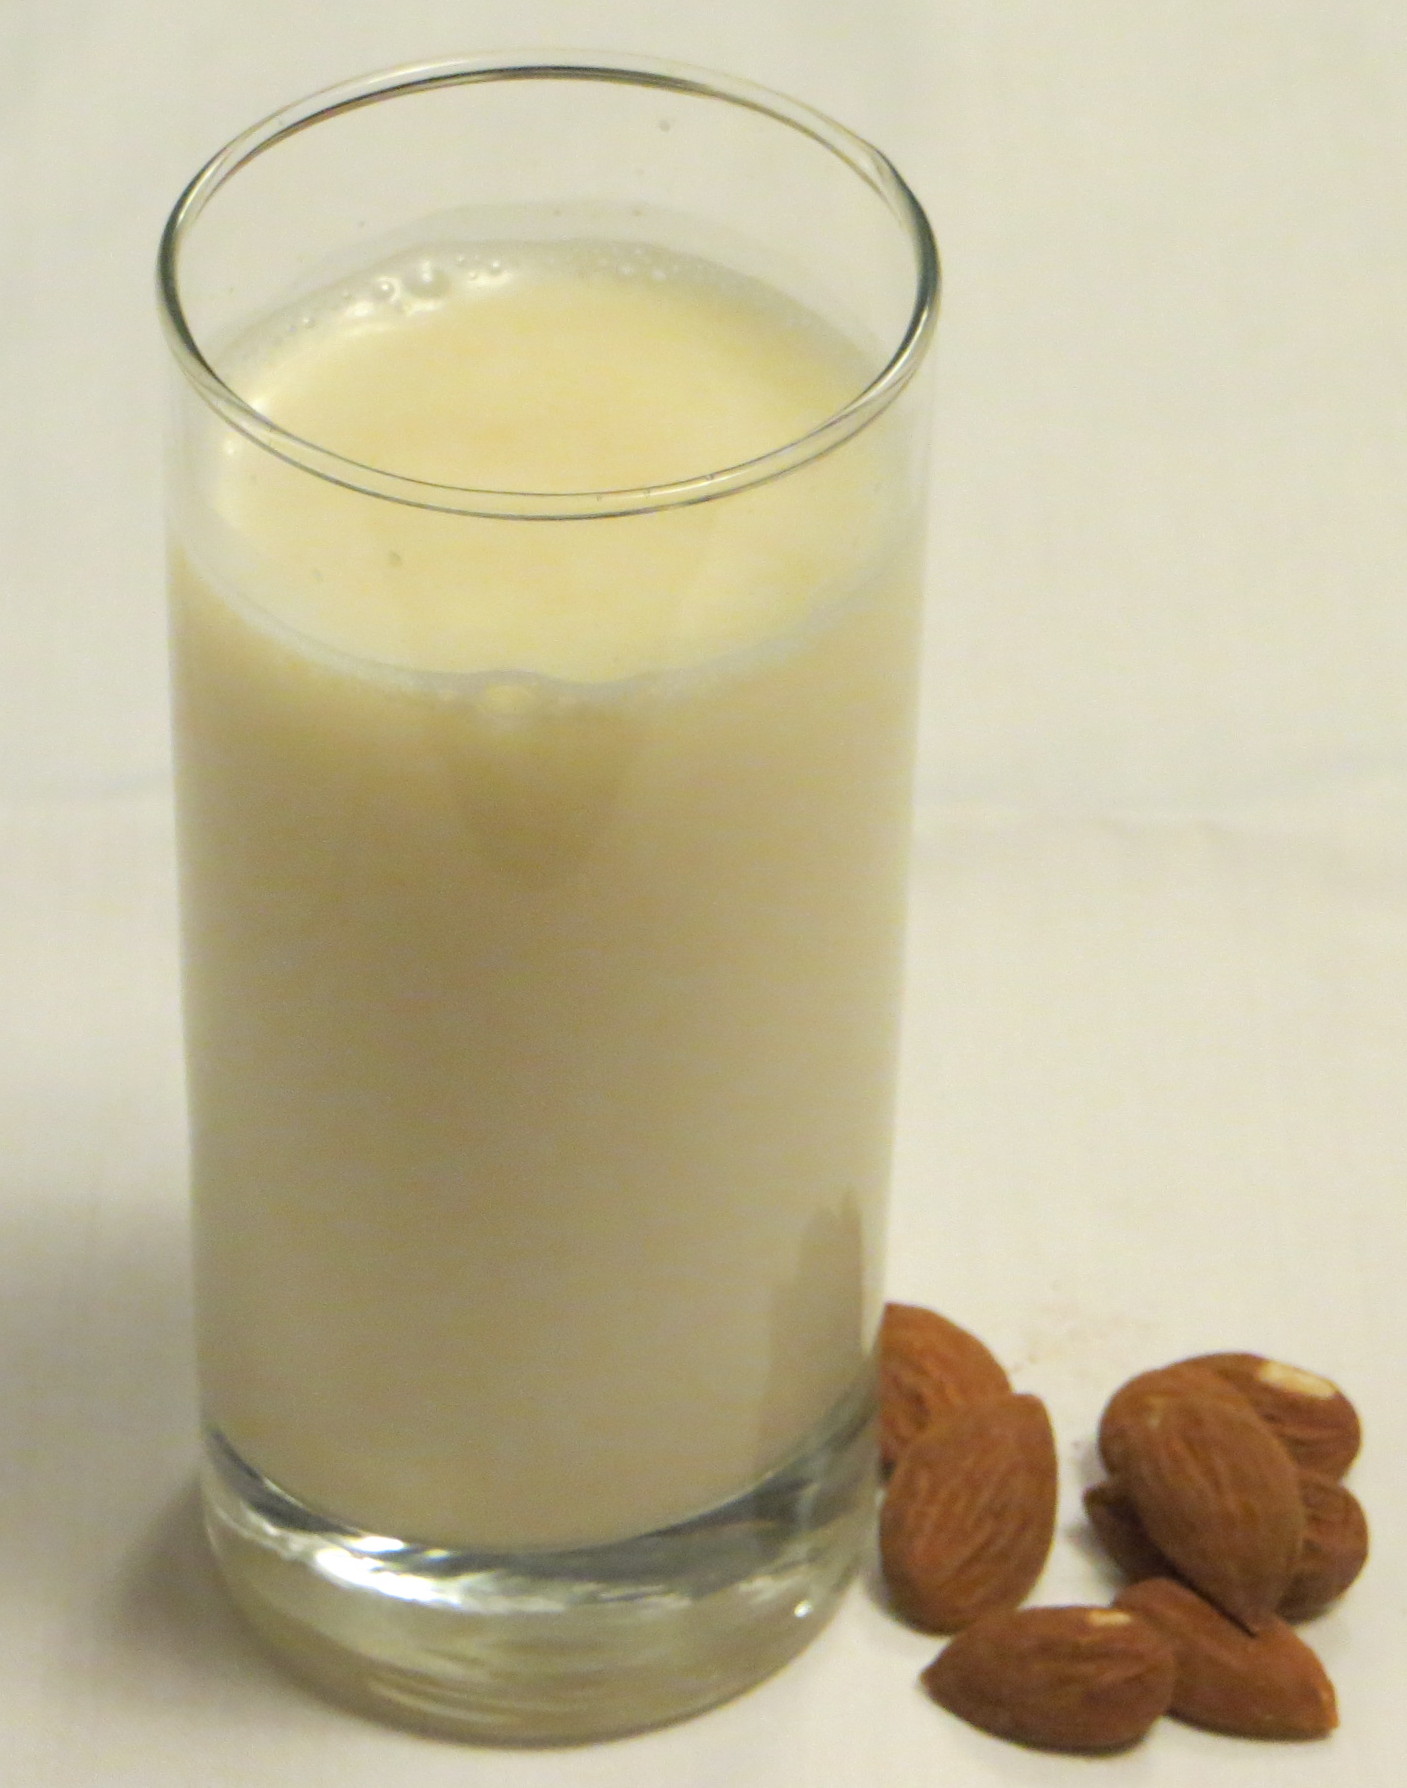 Glass of Almond milk and almonds